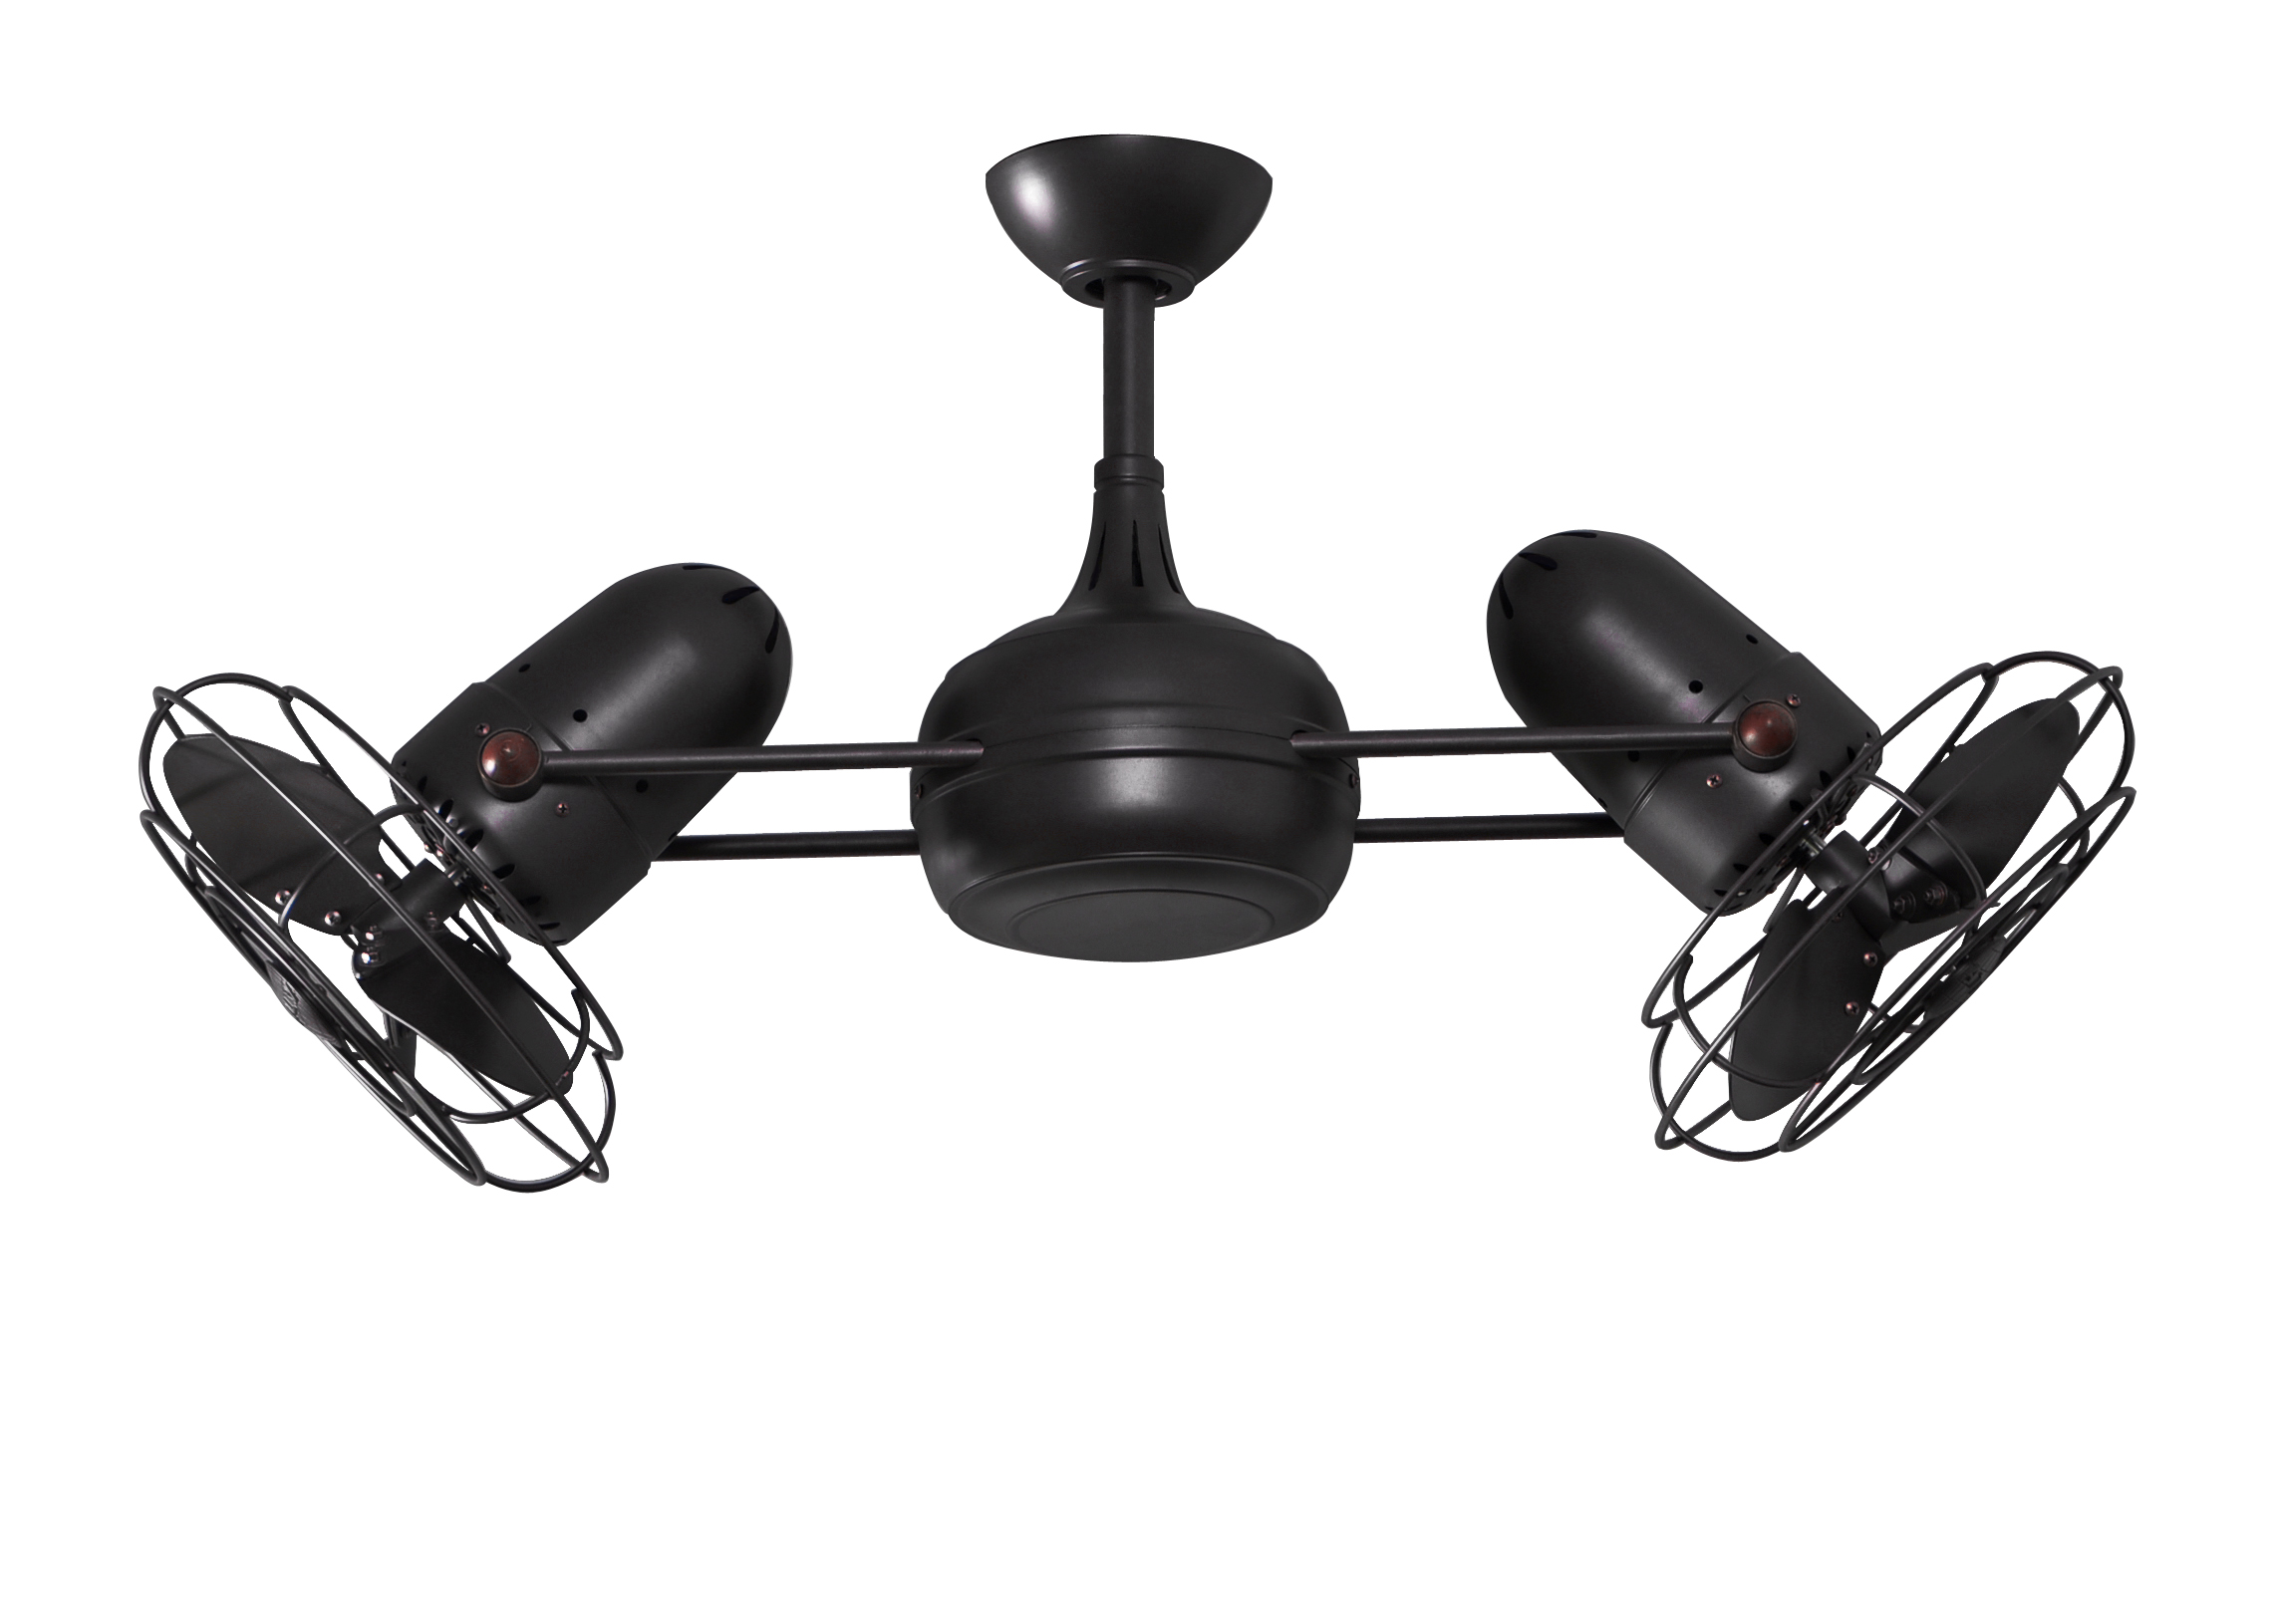 Dagny ceiling fan in matte black with metal blades and decorativ